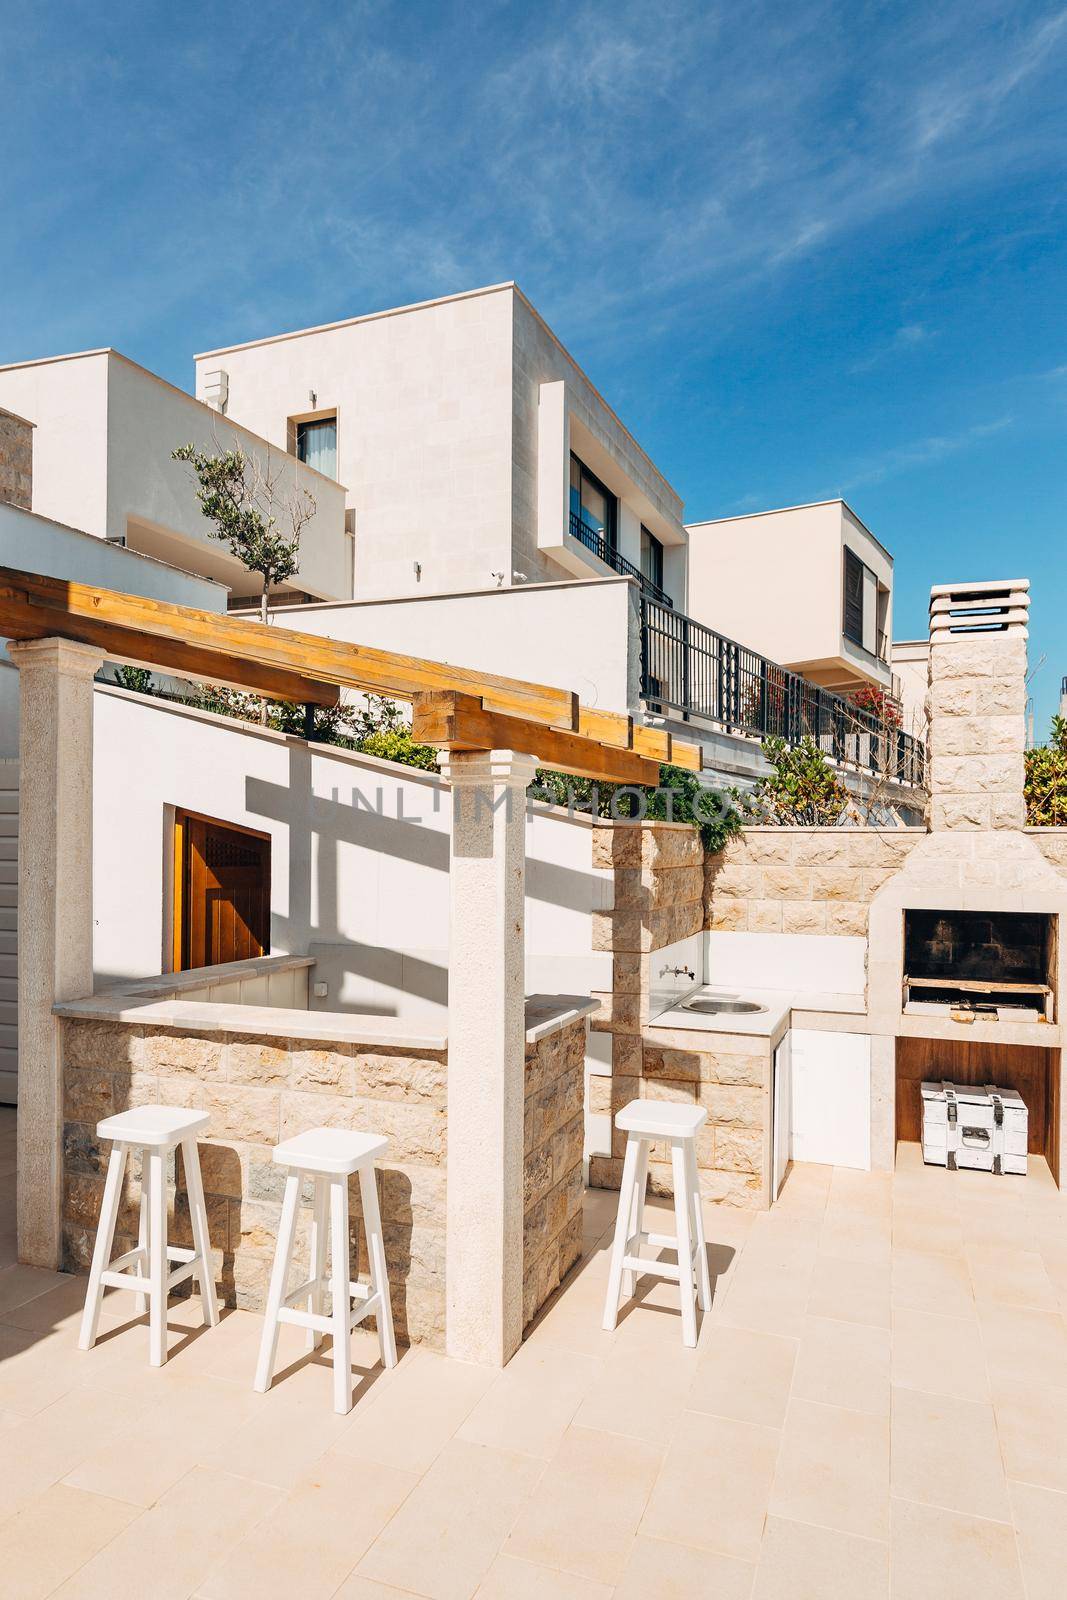 Grill area in the villa by the sea. A large courtyard with a stone grill and an open white stone kitchen. by Nadtochiy